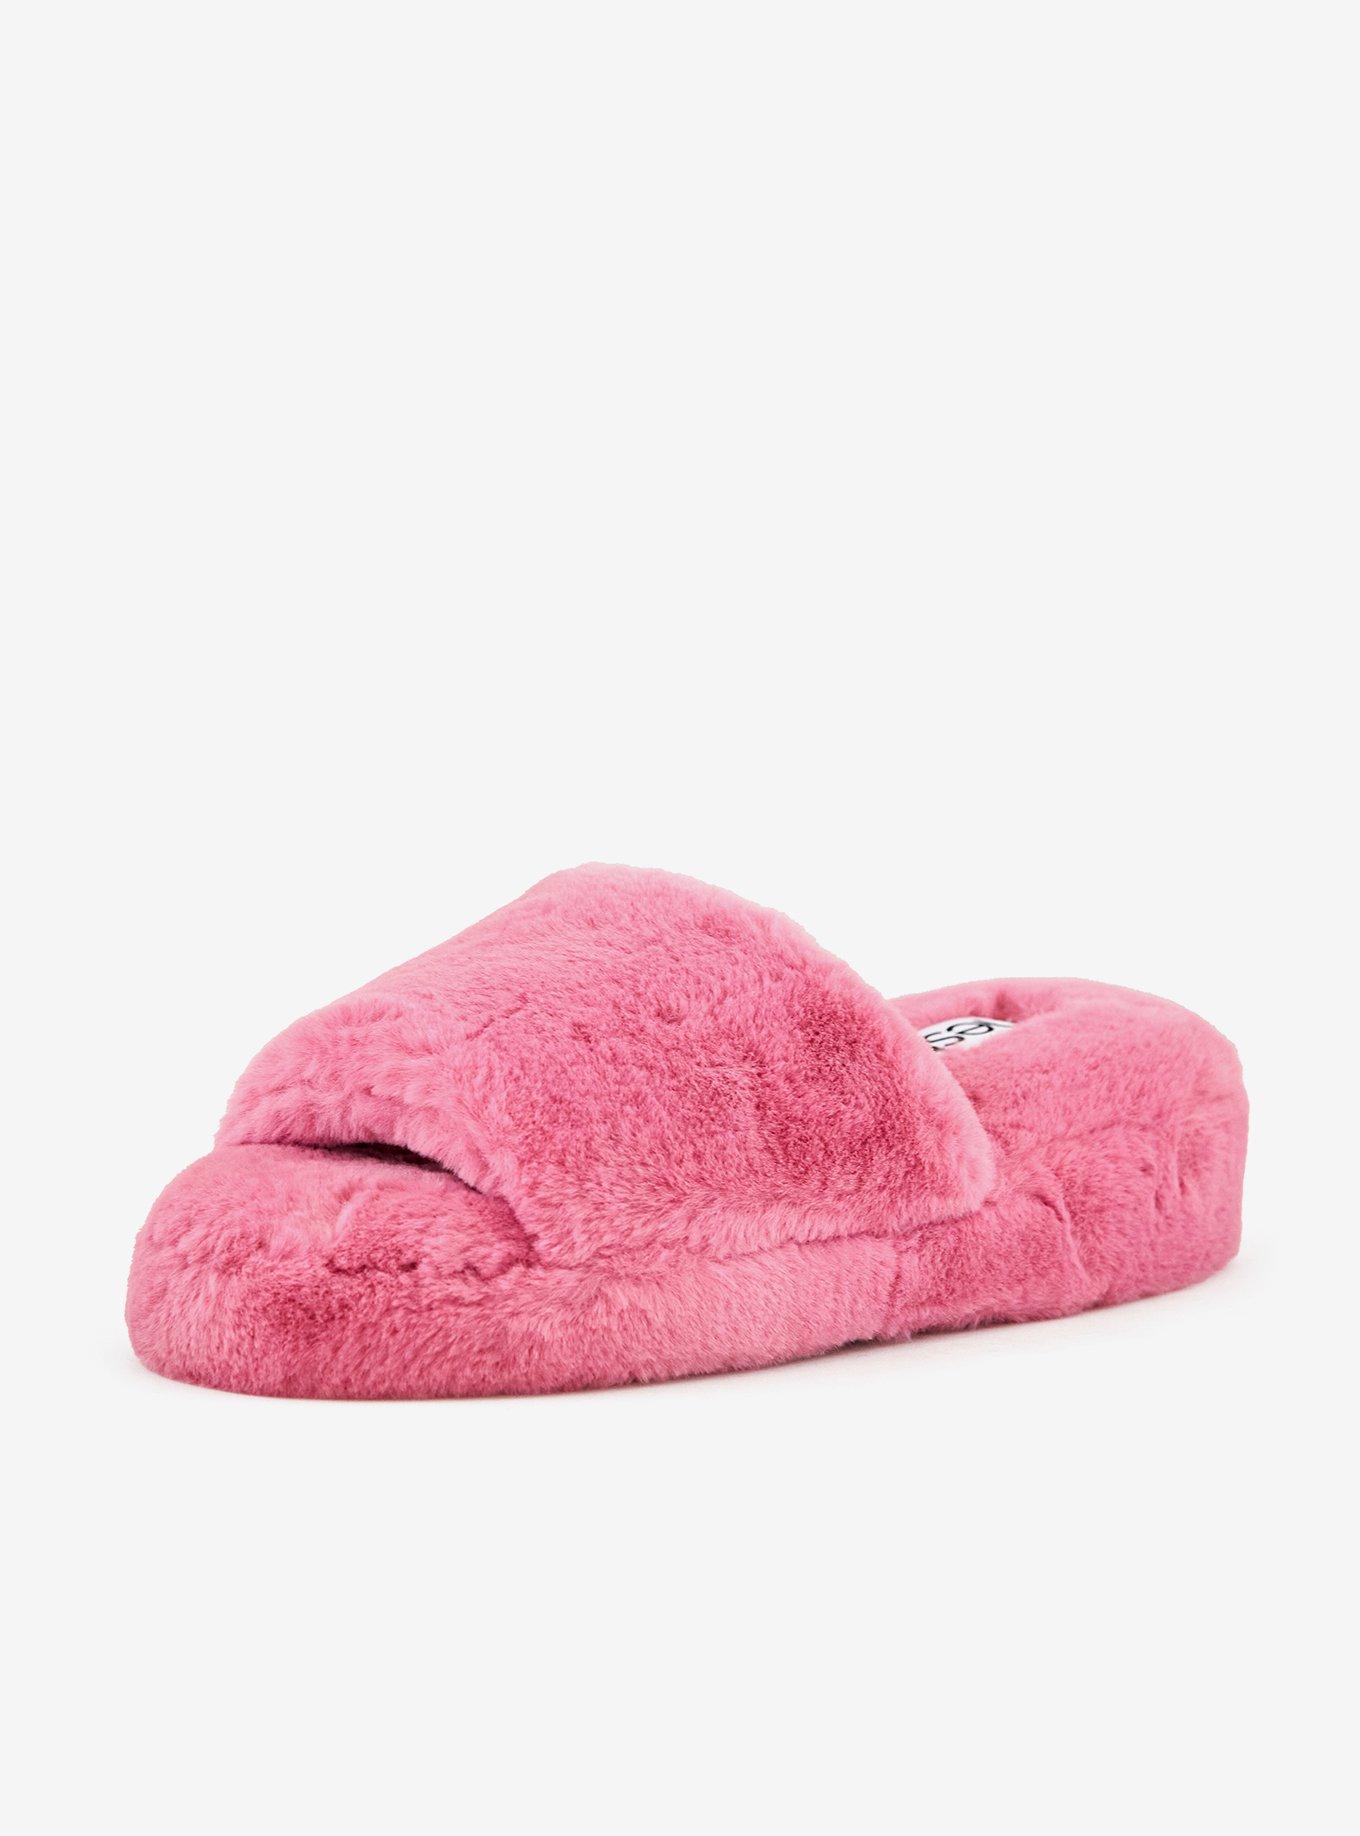 Slippers: Moccasin, Anime & House Slippers | Hot Topic